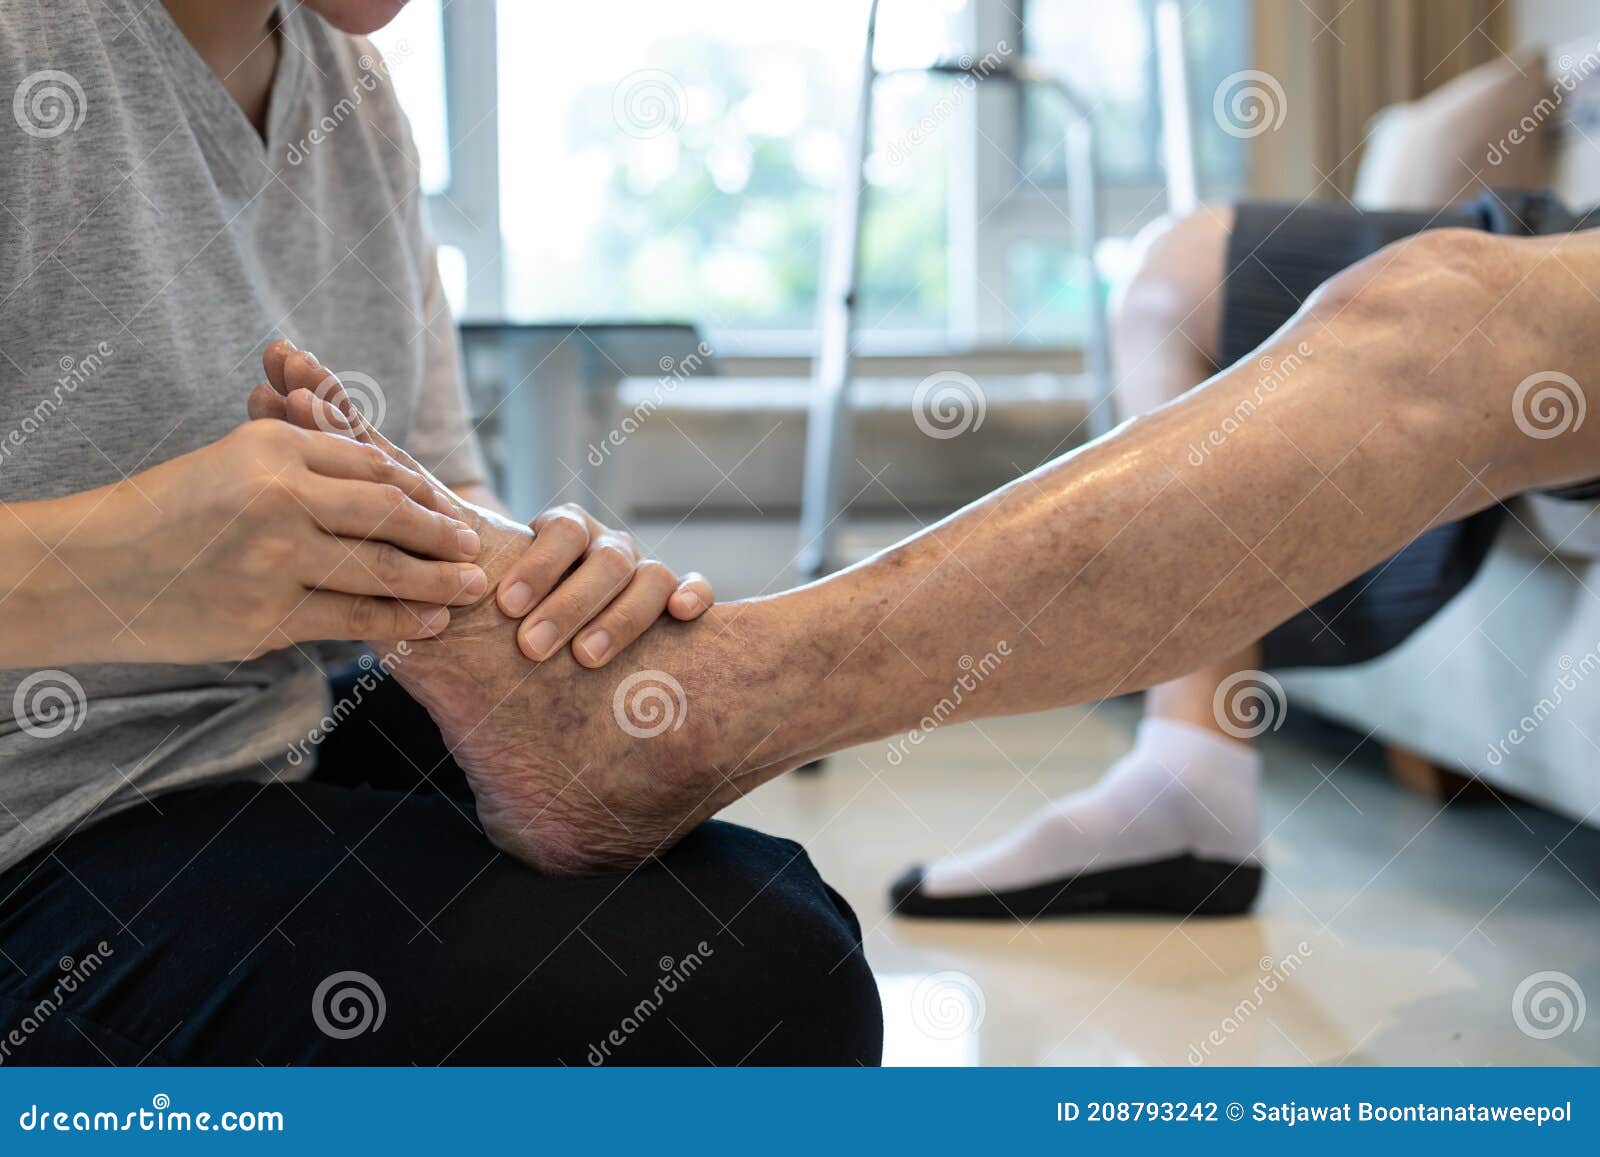 foot massage physical therapy to relieve muscle spasms,massage the tired muscles of senior woman,feet numb from diabetes,old